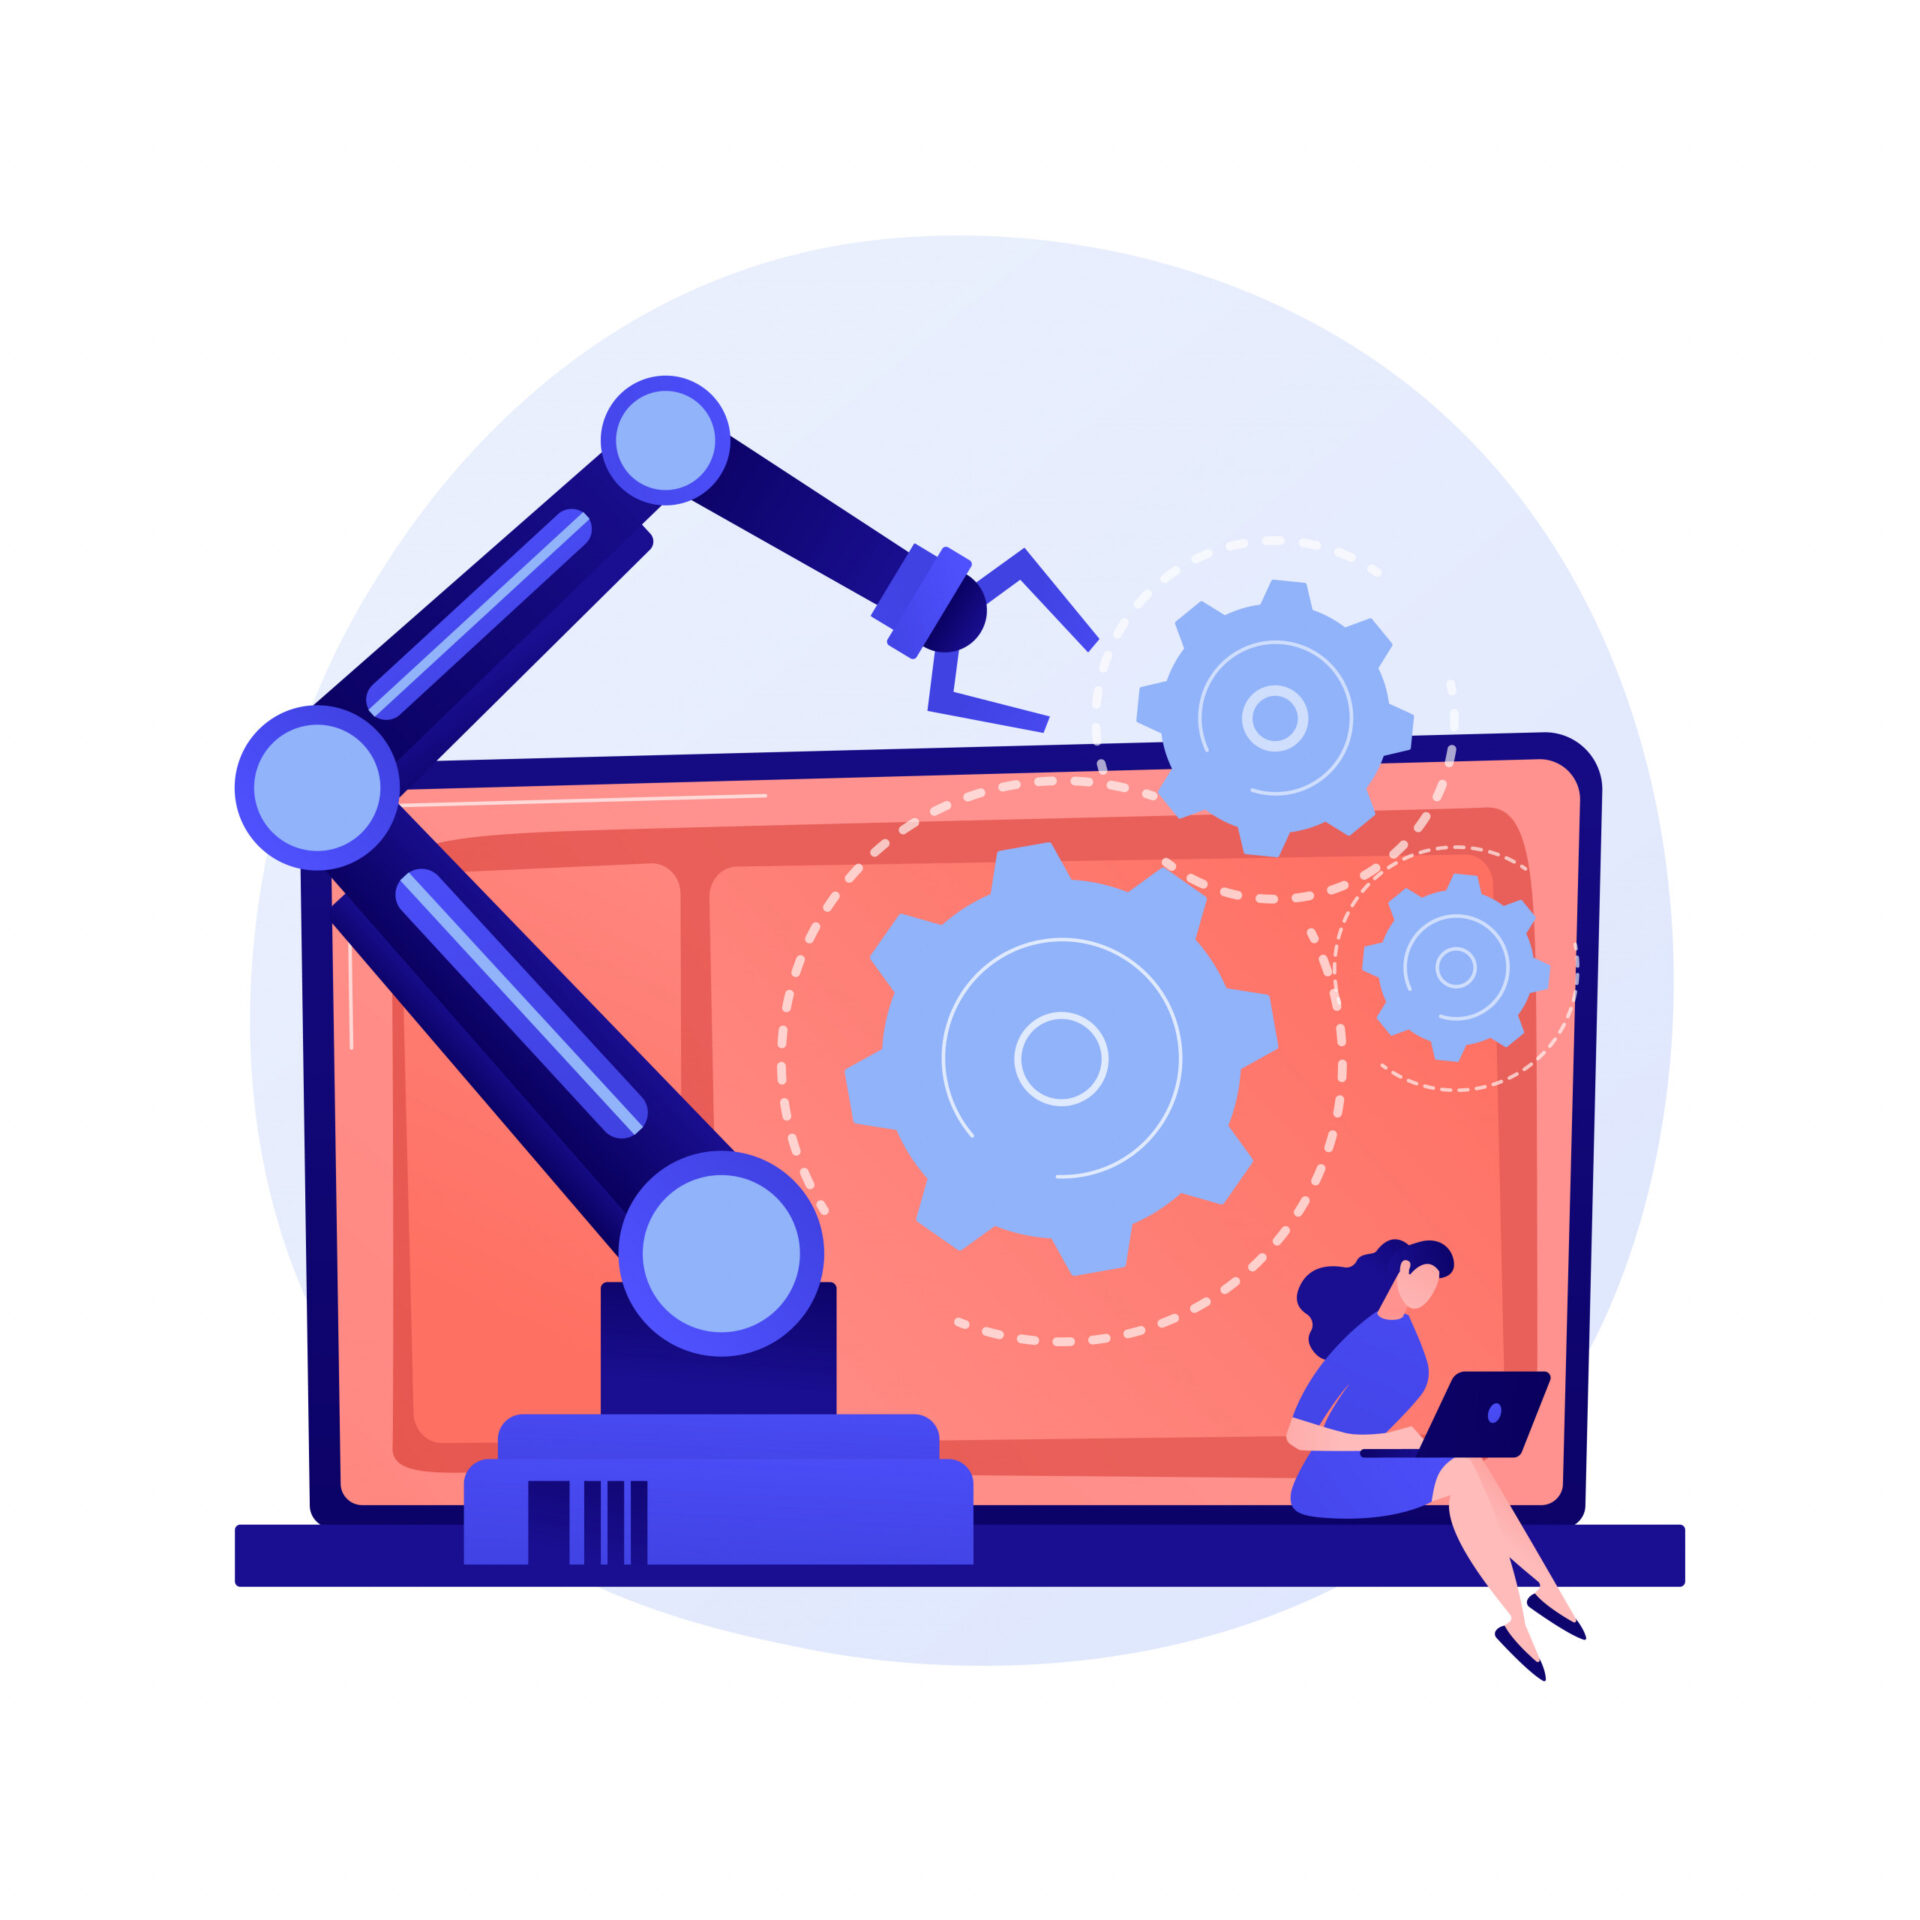 A colorful illustration depicting a large robotic arm working on assembling gears, symbolizing automation and technology. The background features a giant laptop screen displaying gears in motion, emphasizing the integration of technology and machinery.